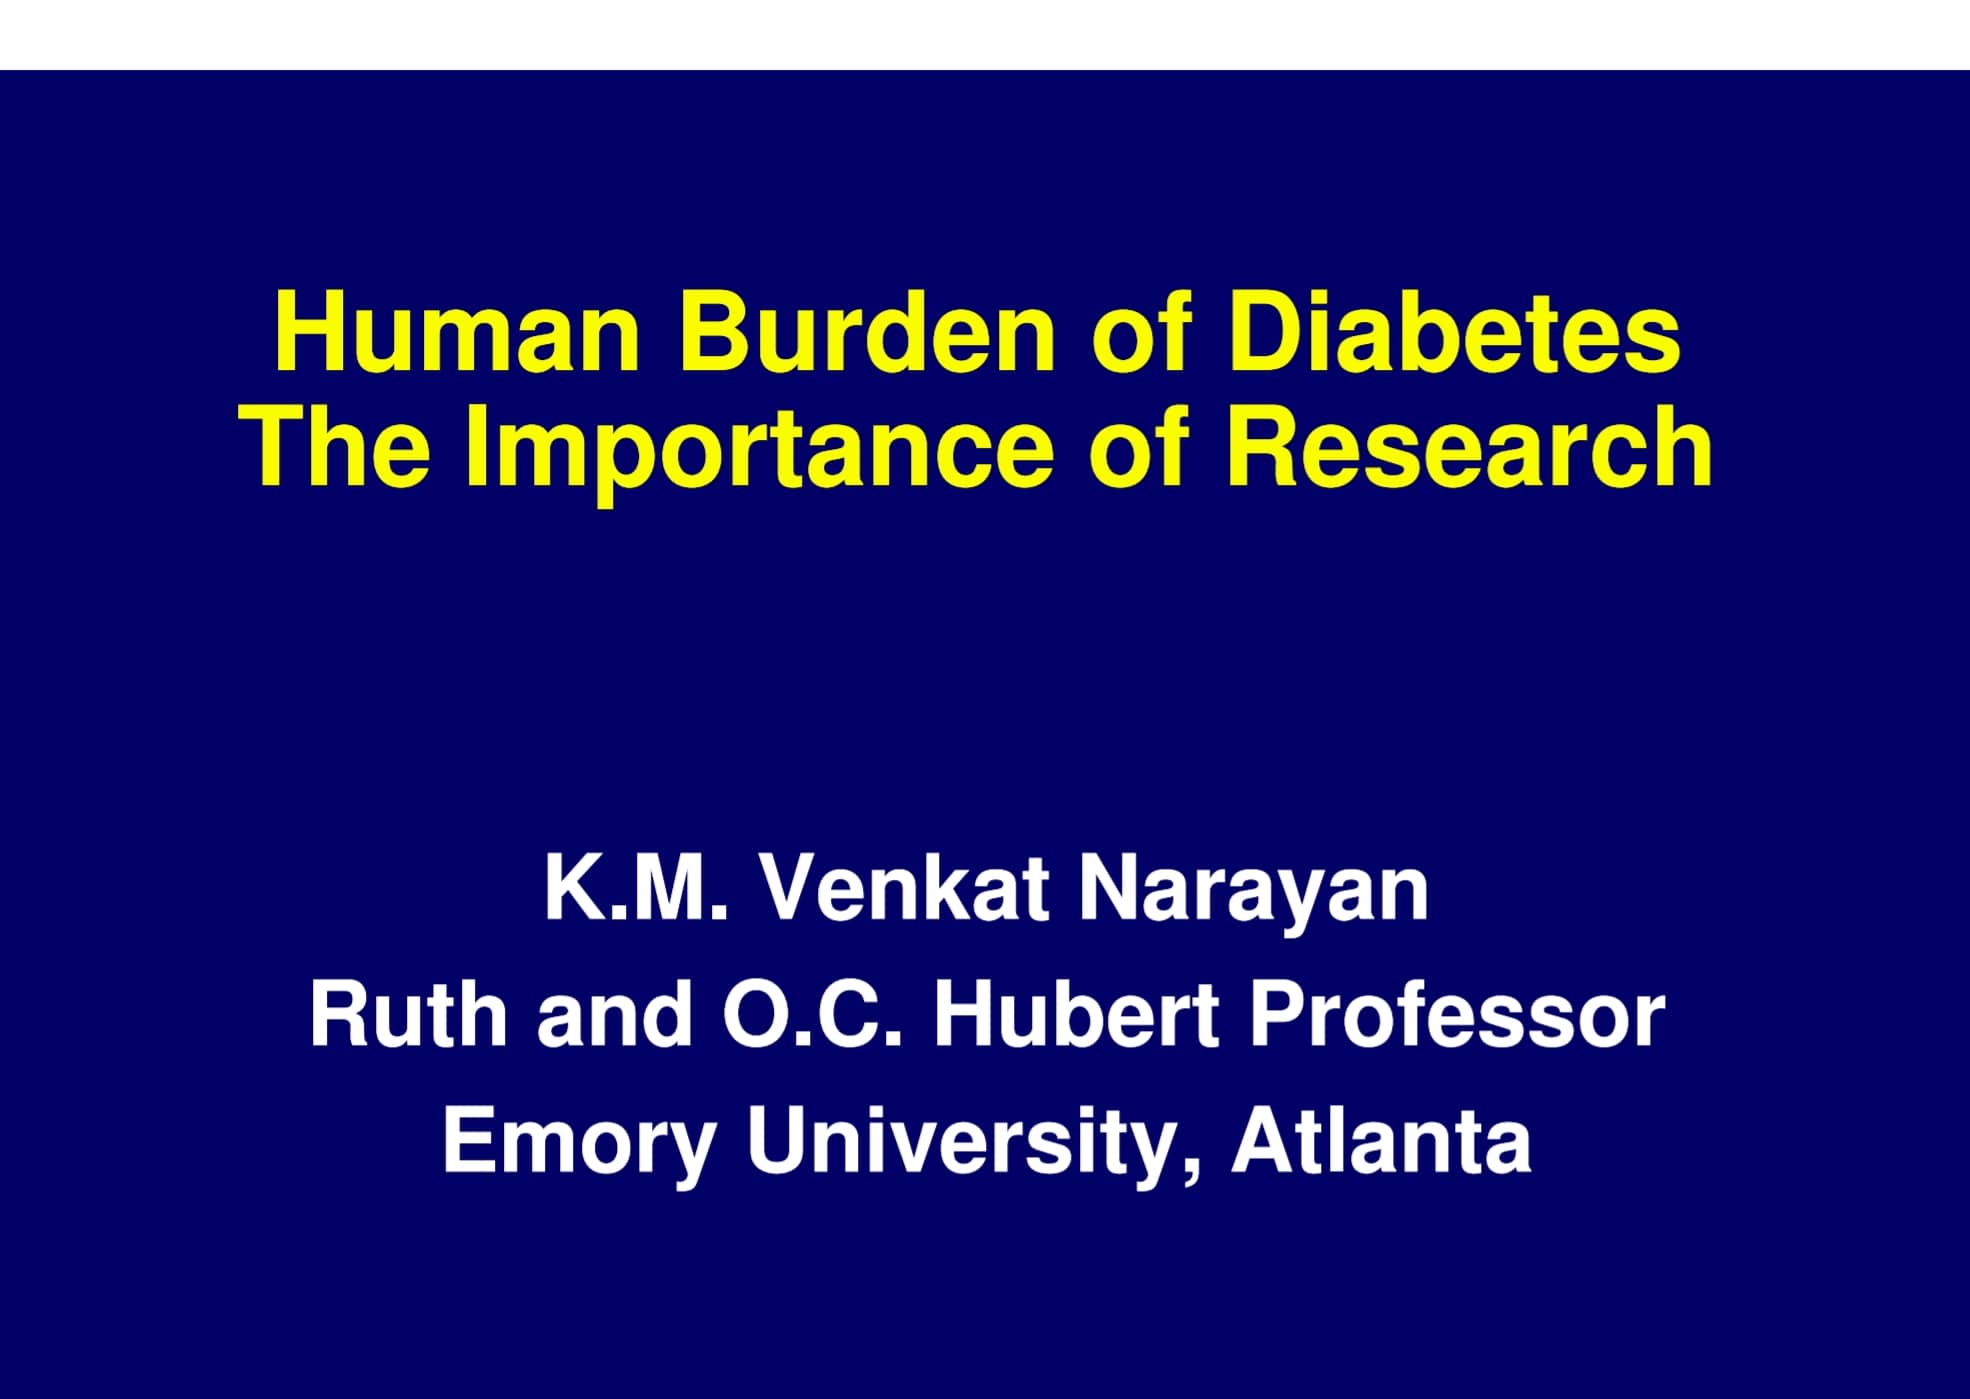 "Human Burden of Diabetes and the Importance of Research" presentation cover.